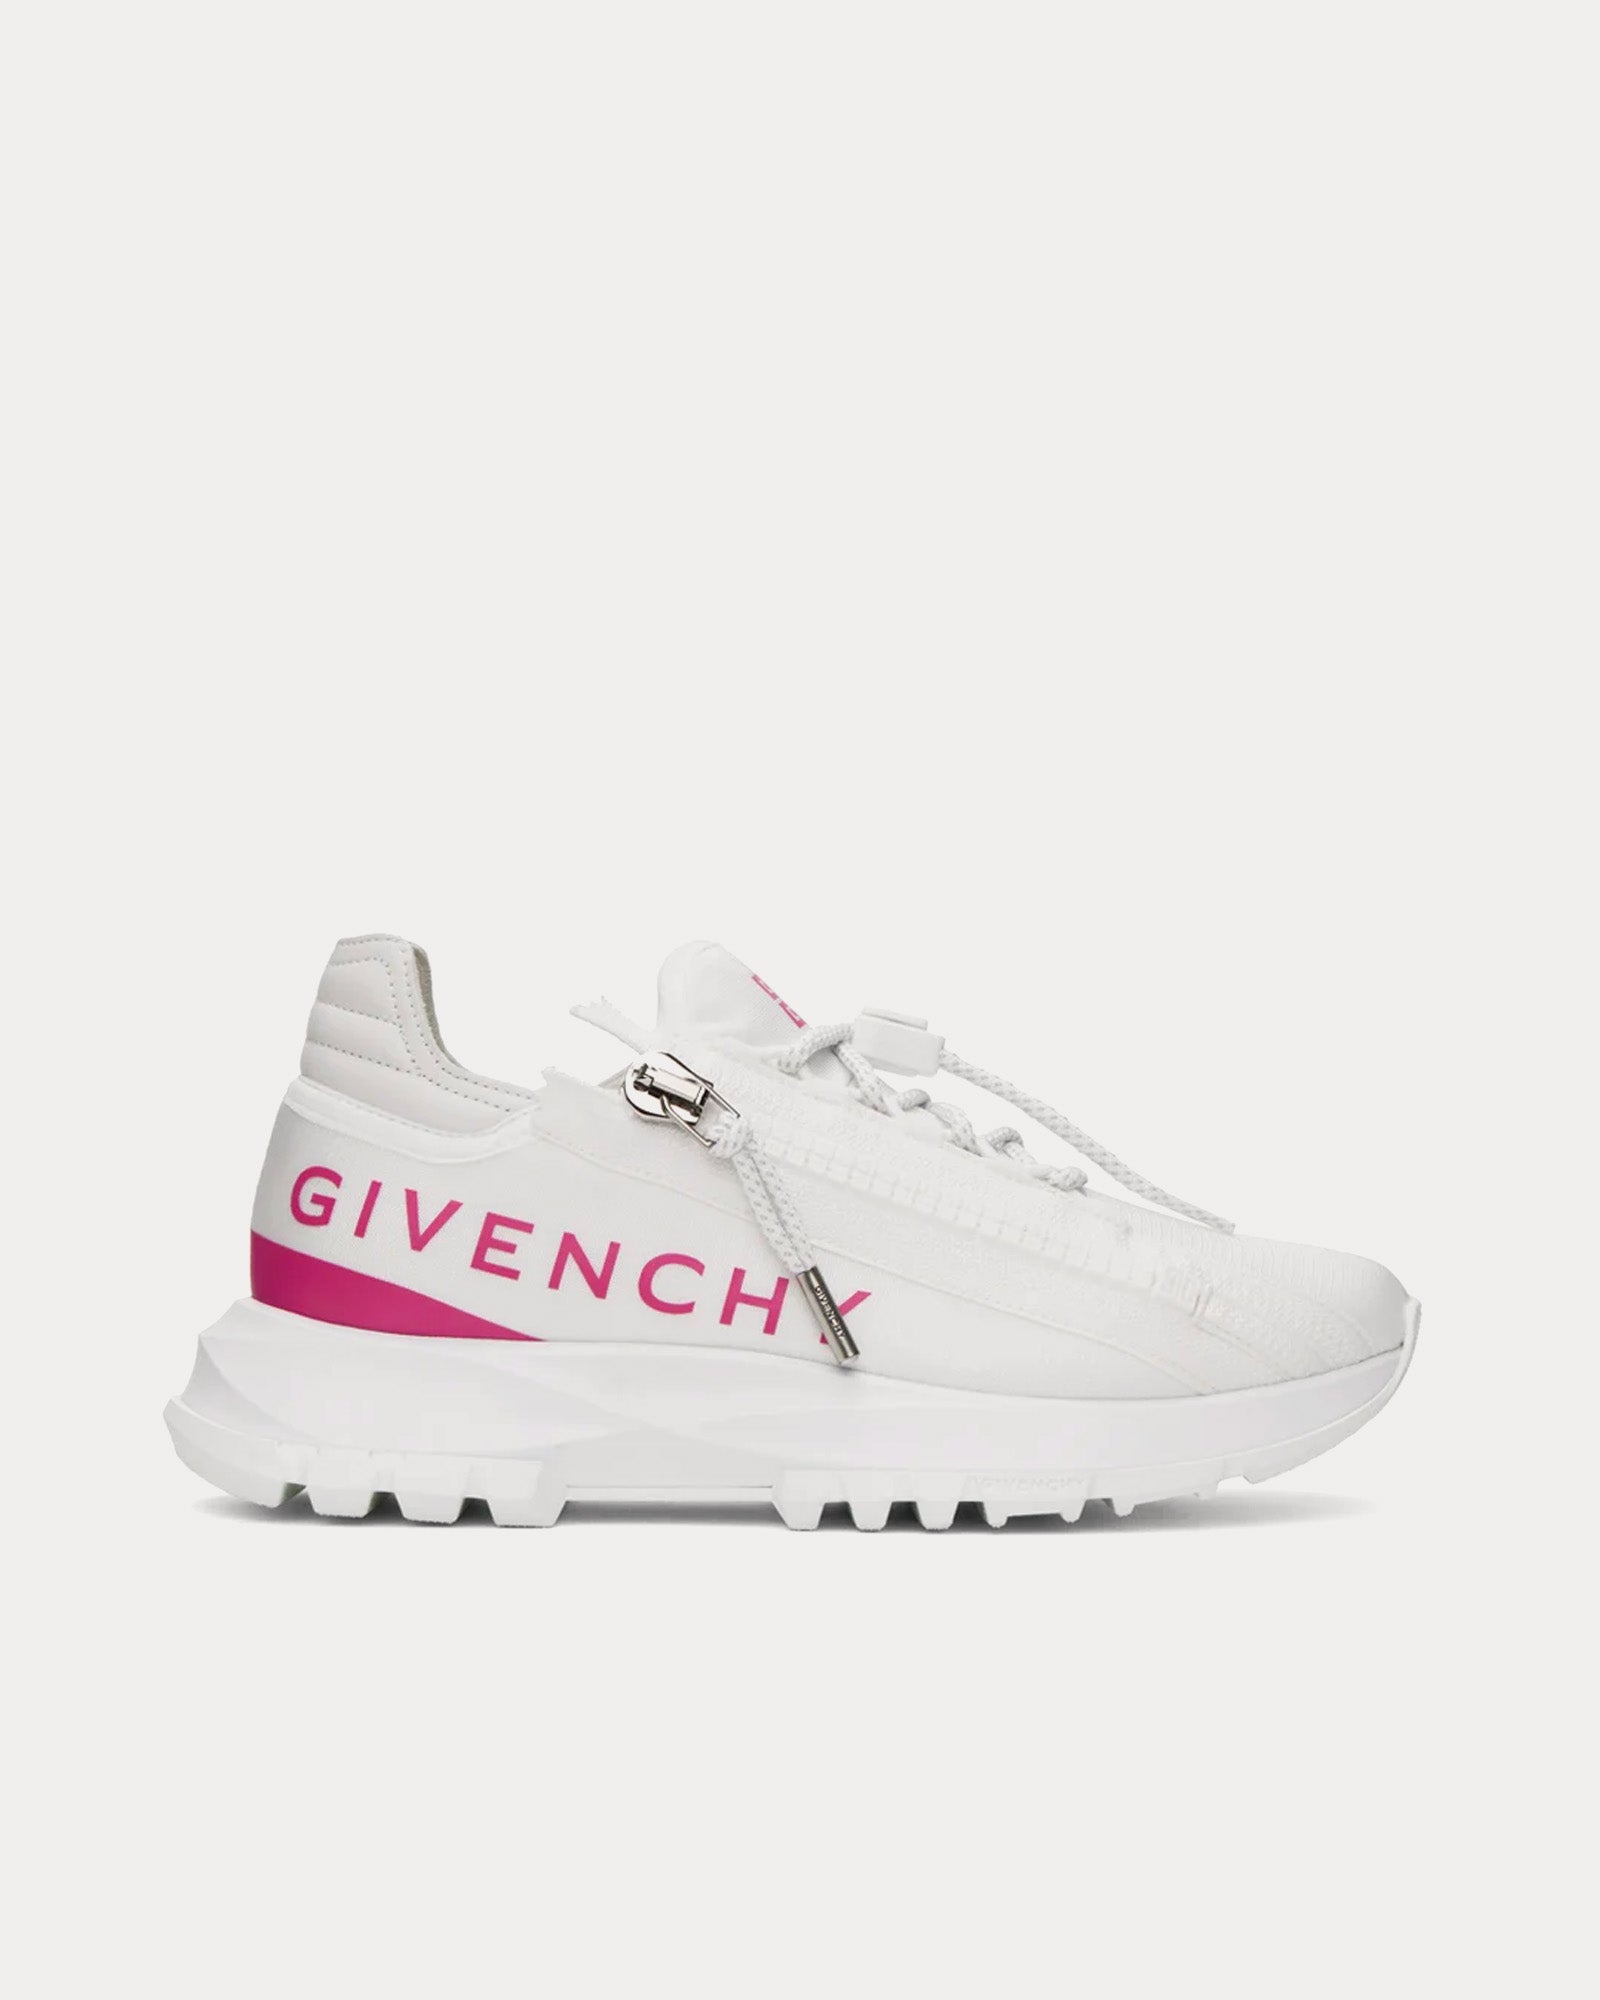 Givenchy - Spectre Runner Leather With Zip White / Pink Low Top Sneakers